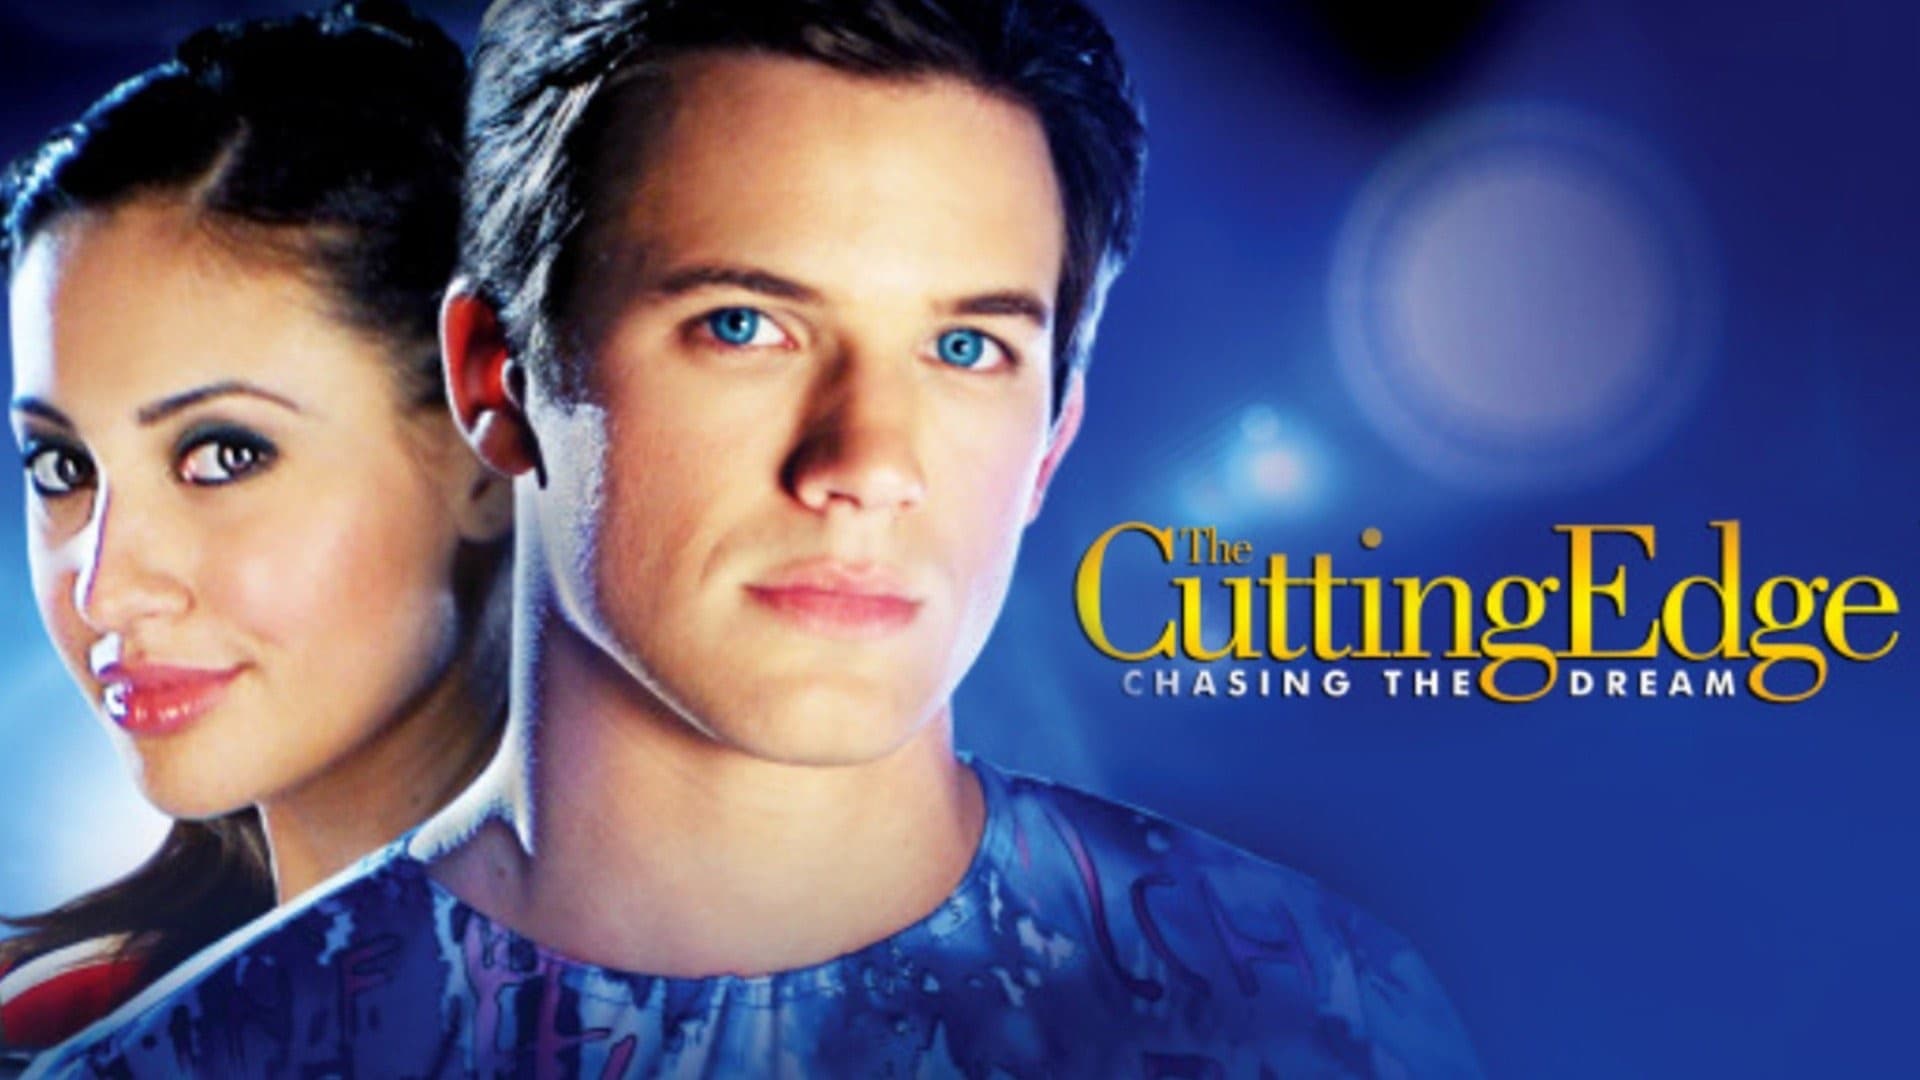 The Cutting Edge: Chasing the Dream (2008)